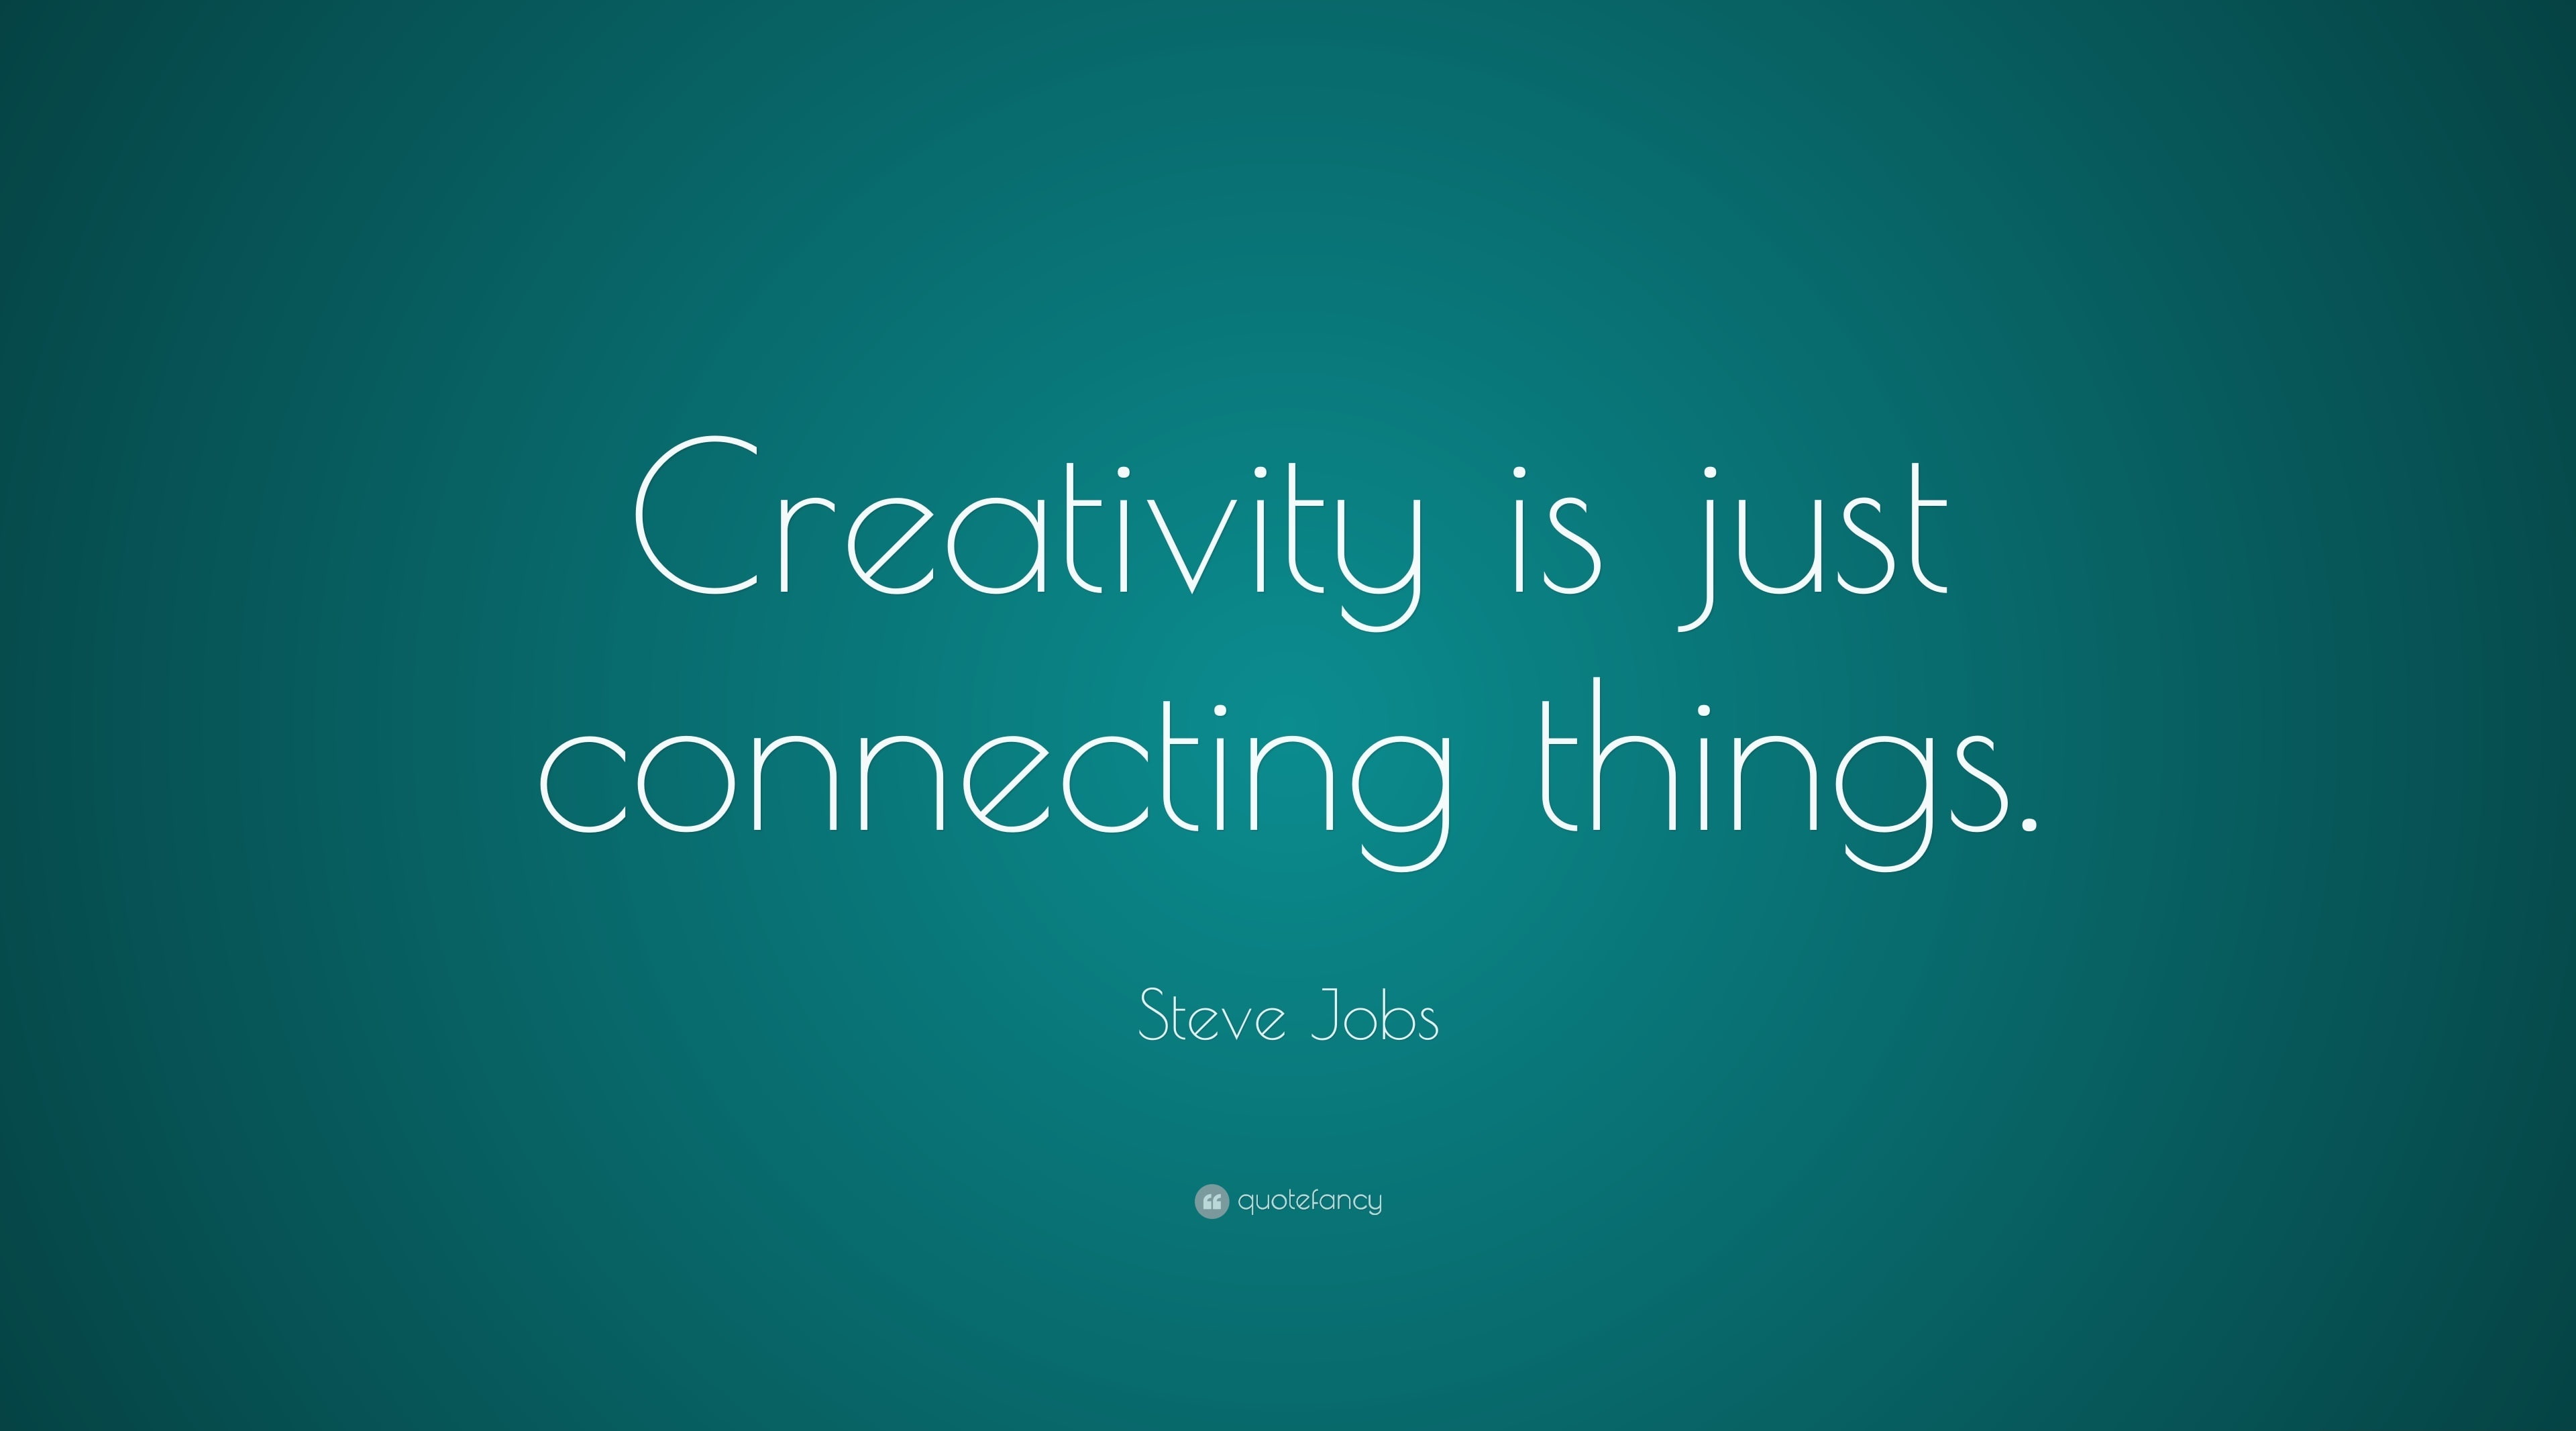 Creativity is just connecting things, Creativity is just connecting things Steve Jobs quote